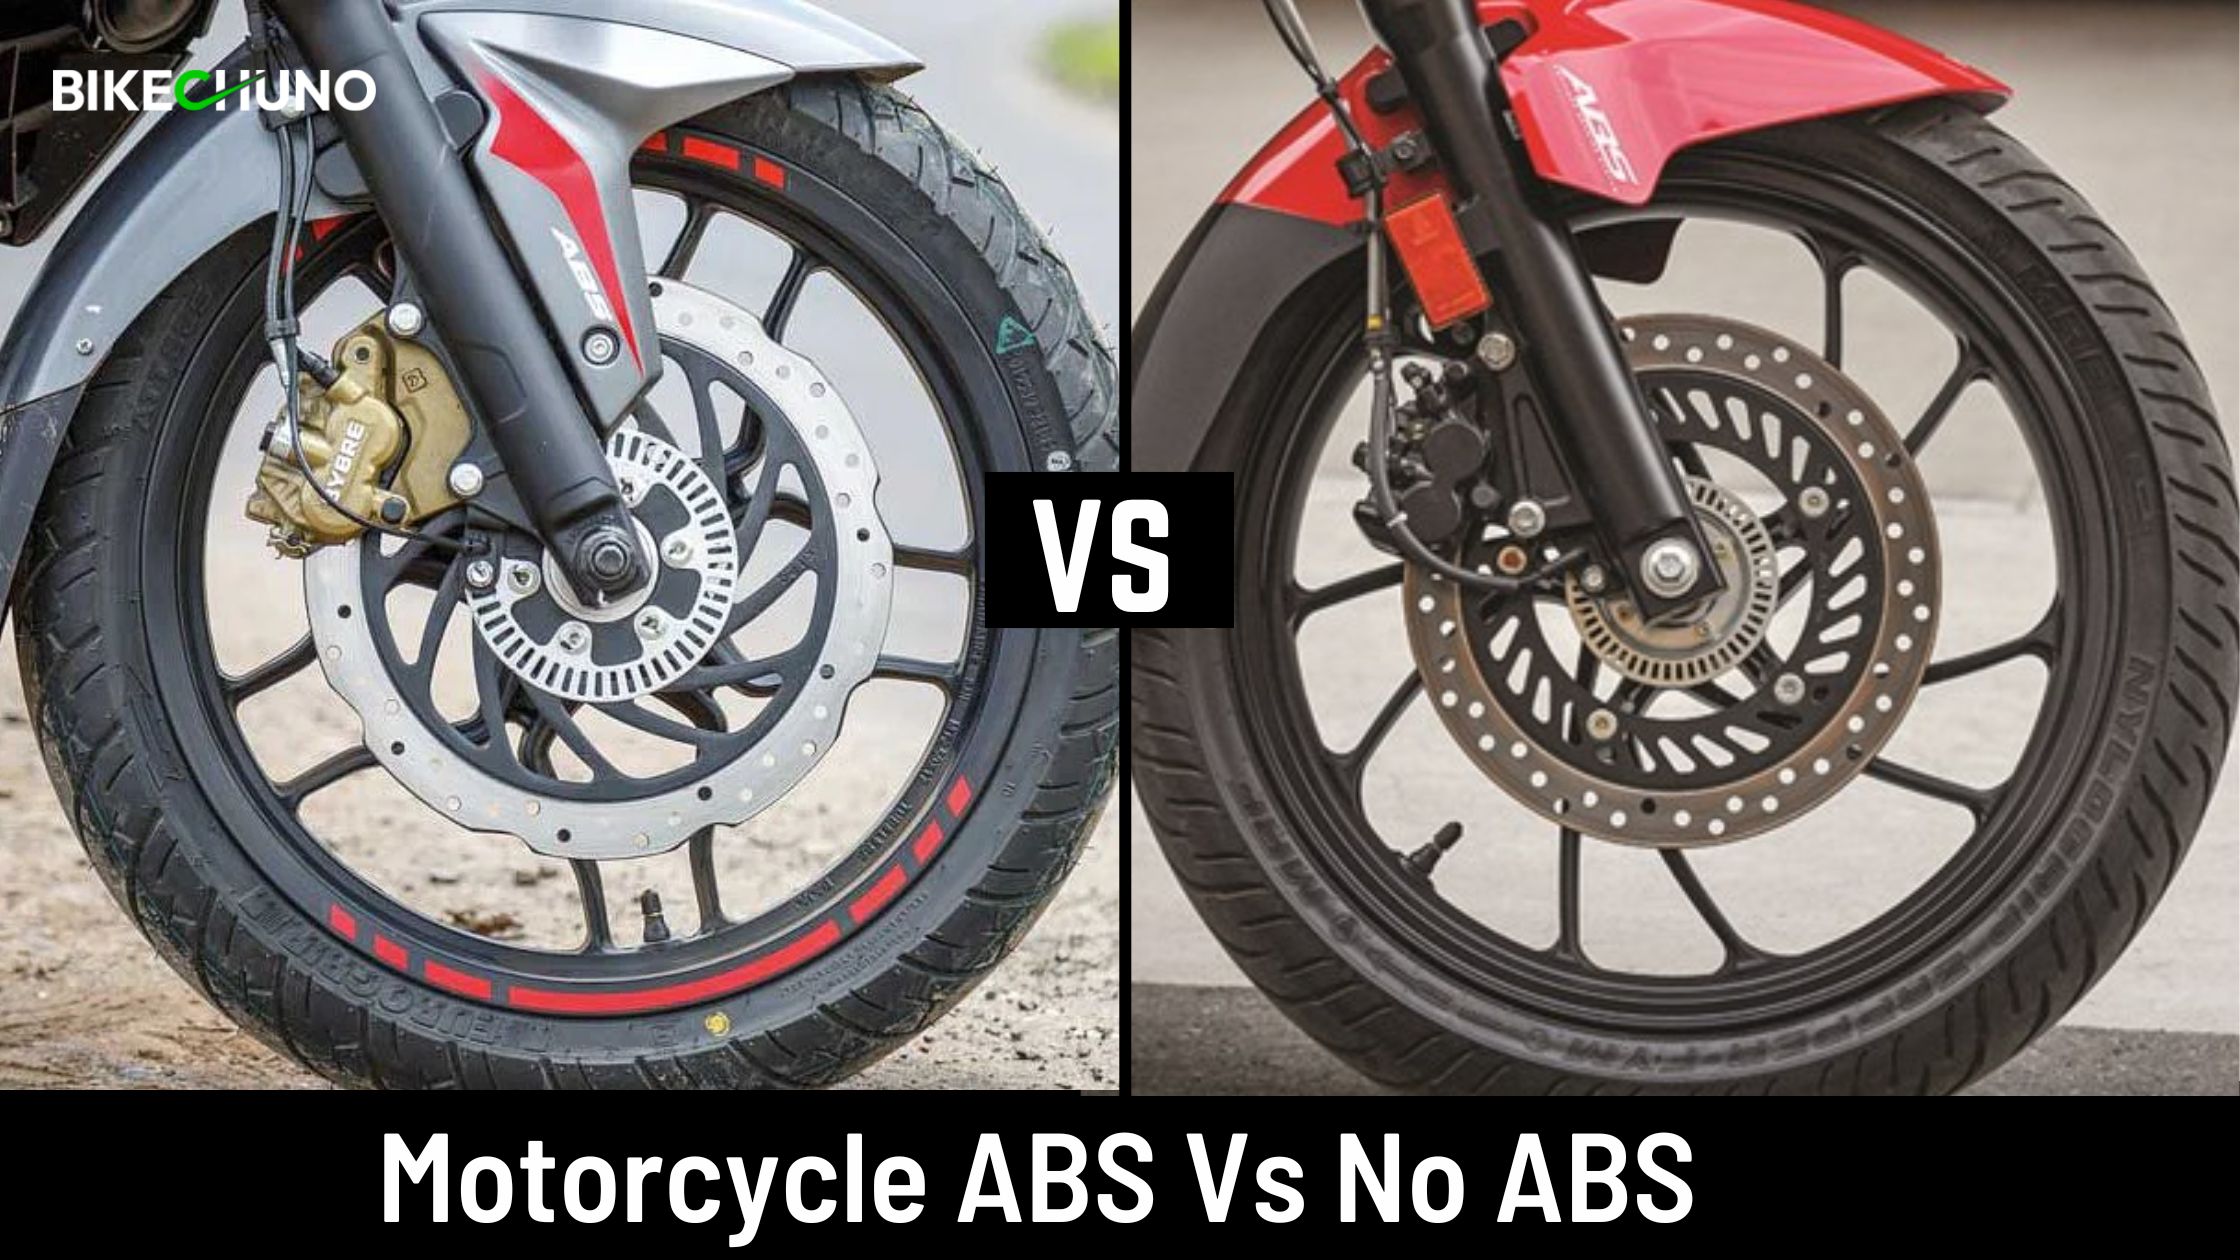 Motorcycle ABS Vs. No ABS
